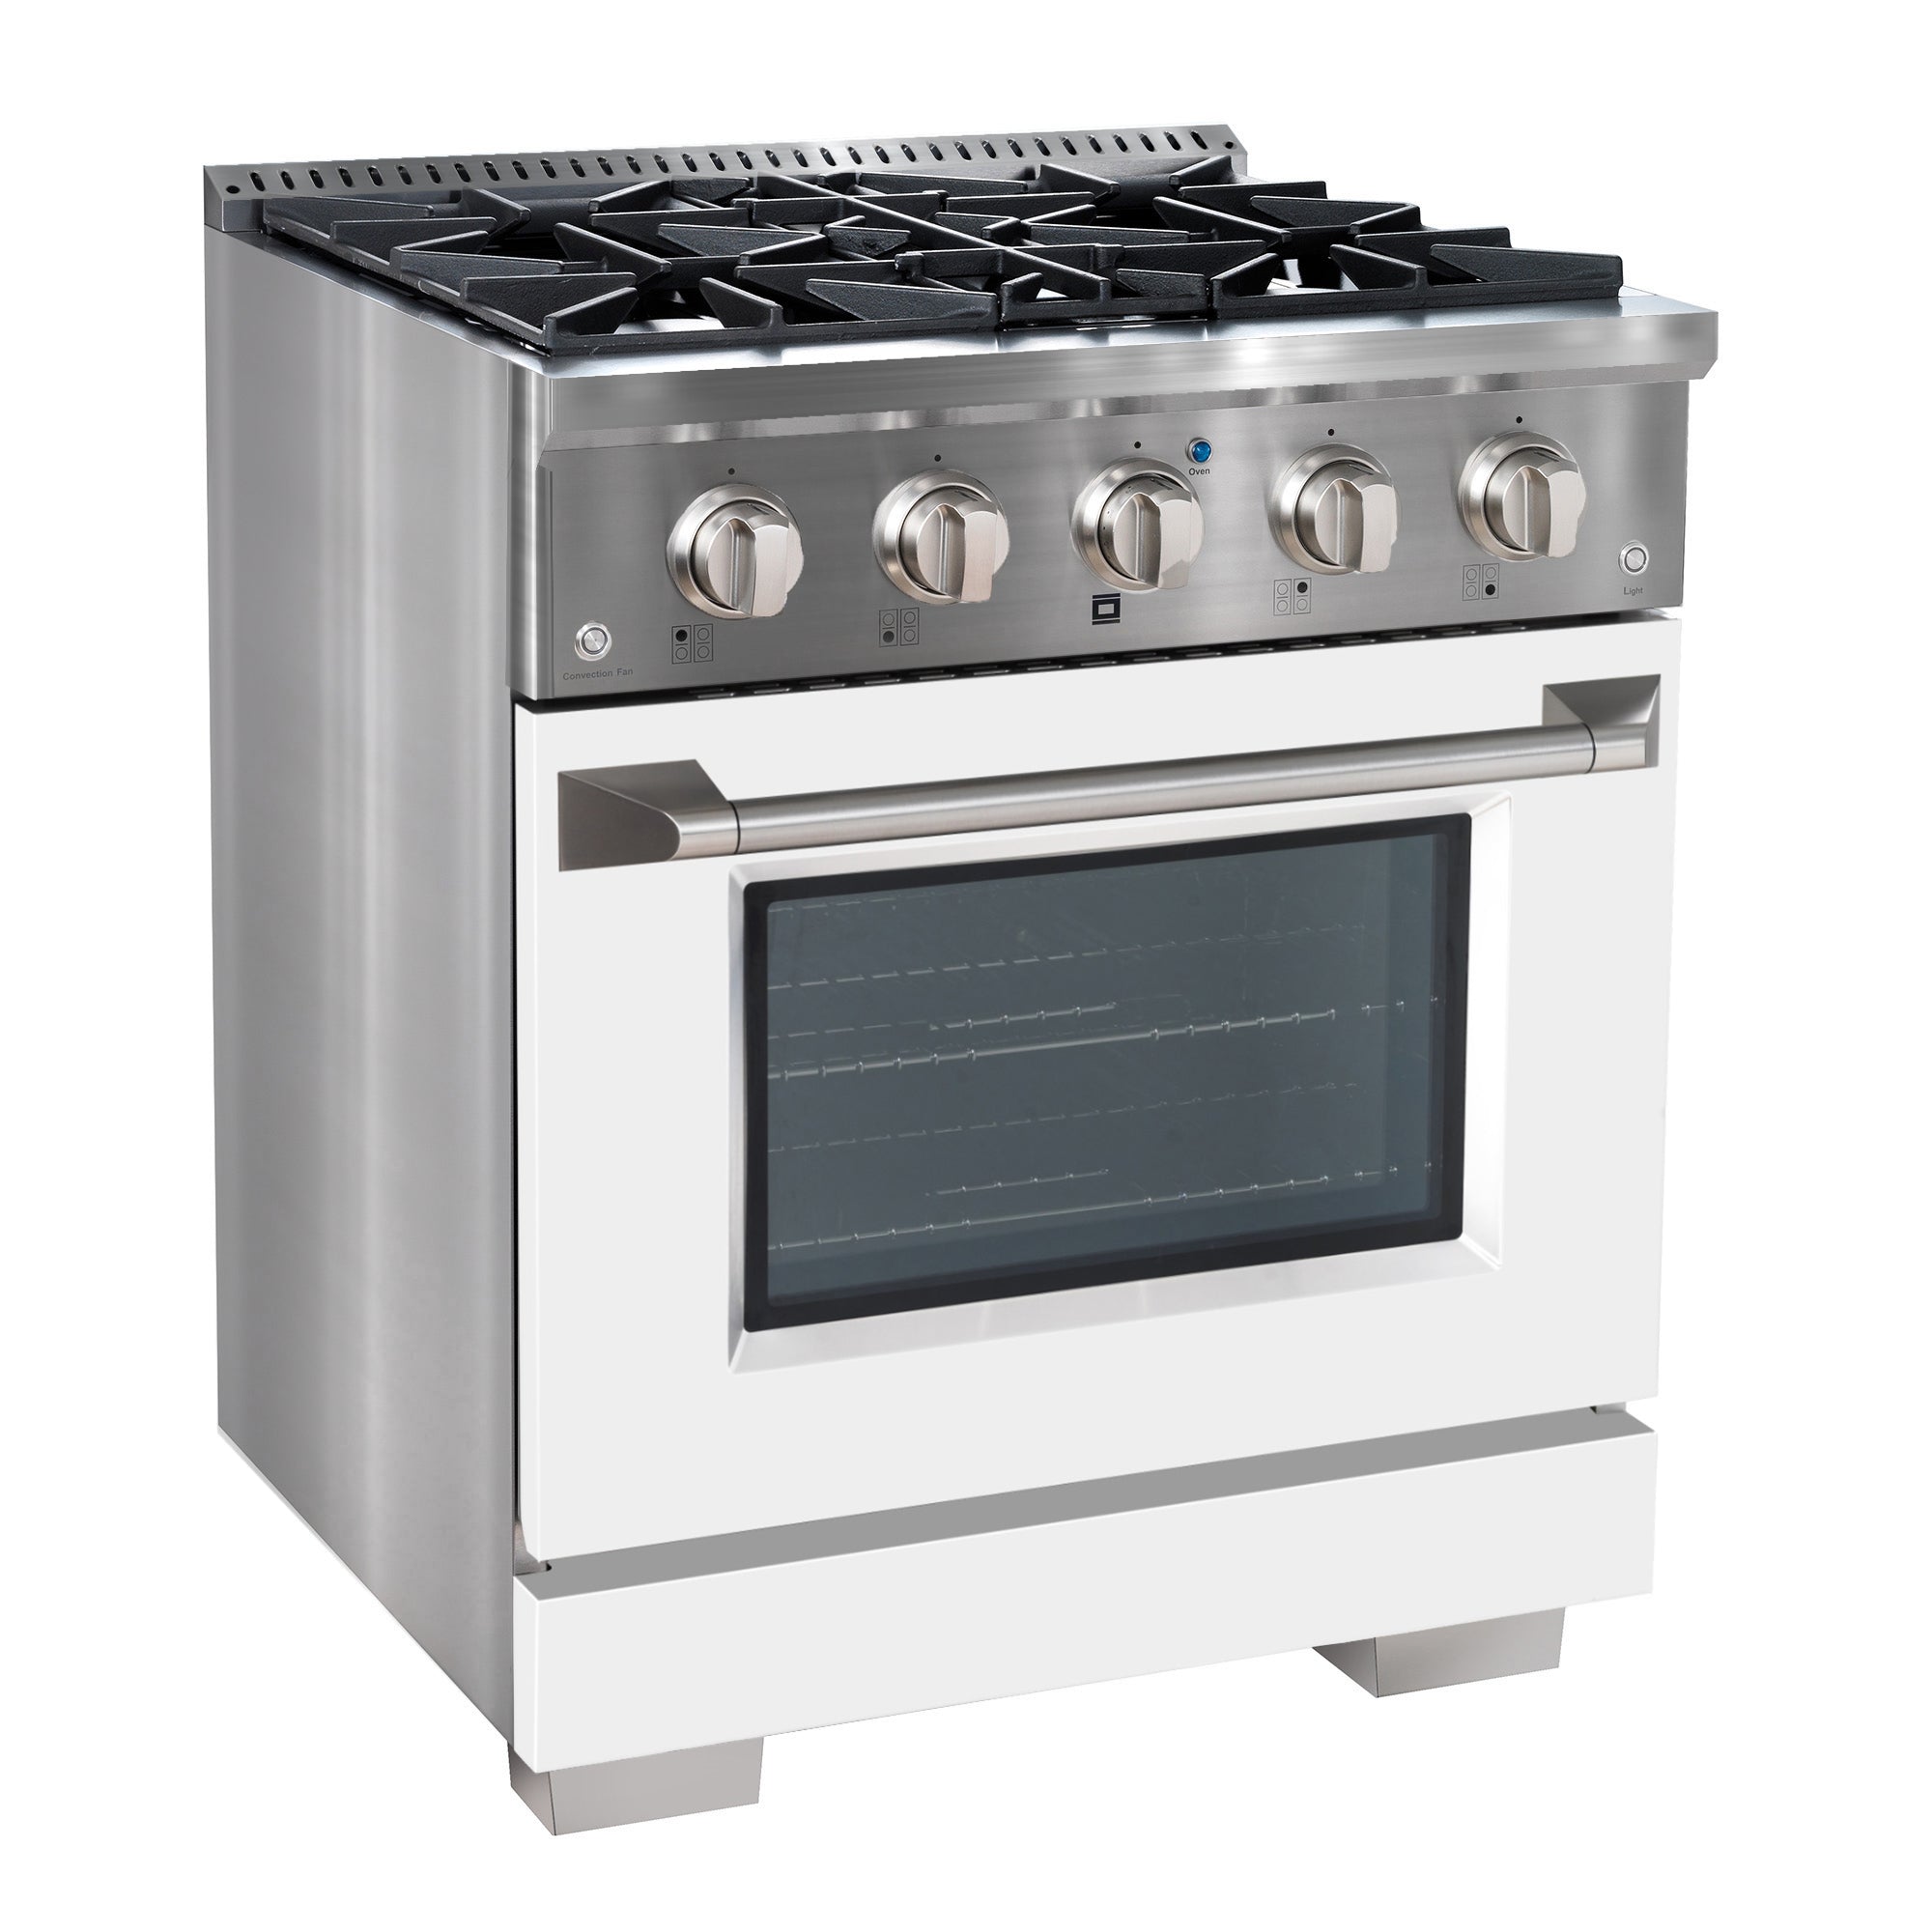 Ancona 2-piece Kitchen Appliance Package with 30” Dual Fuel Range with White Door and 600 CFM Wall-Mounted Range Hood